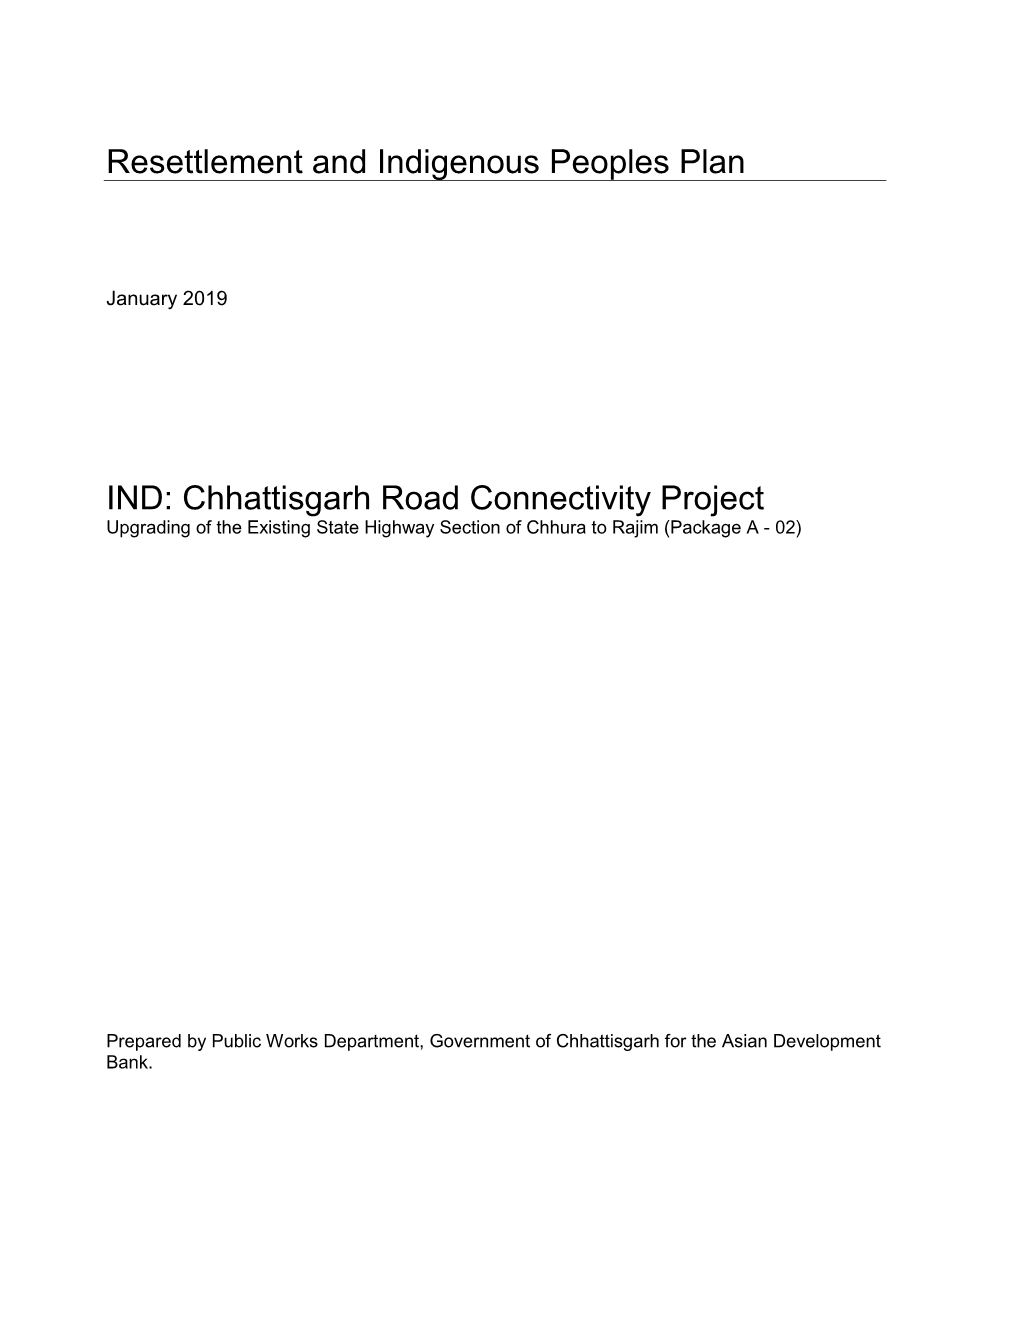 Resettlement and Indigenous Peoples Plan IND: Chhattisgarh Road